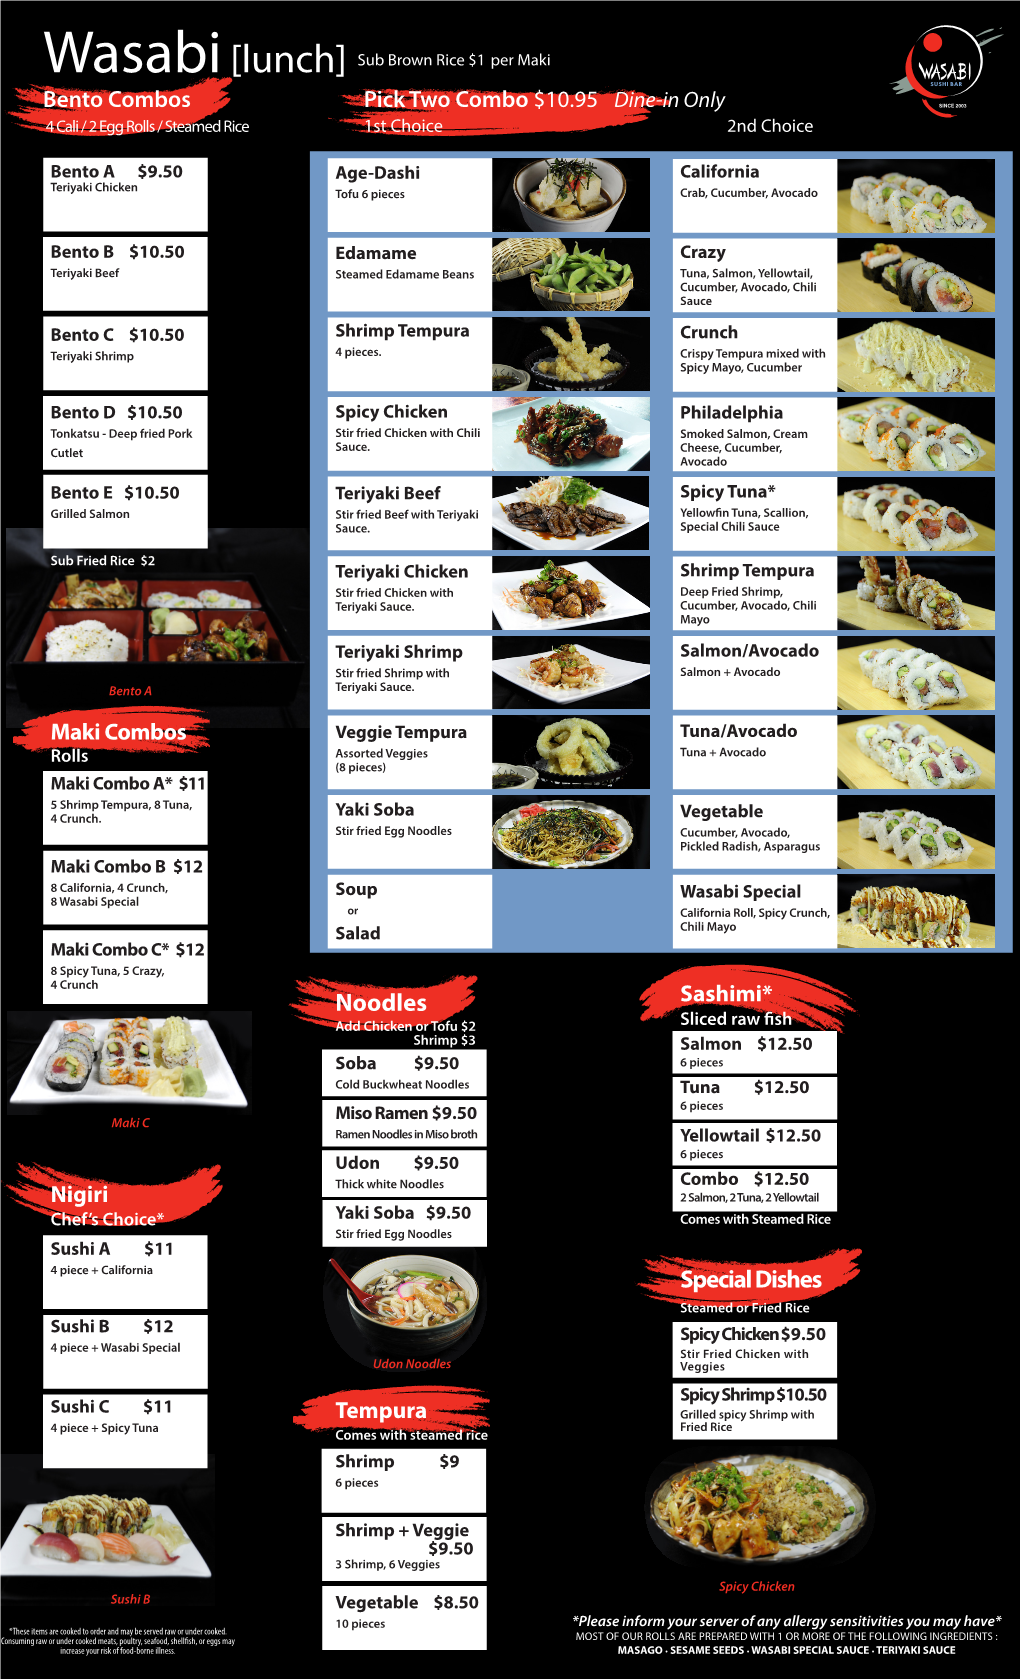 Noodles Special Dishes